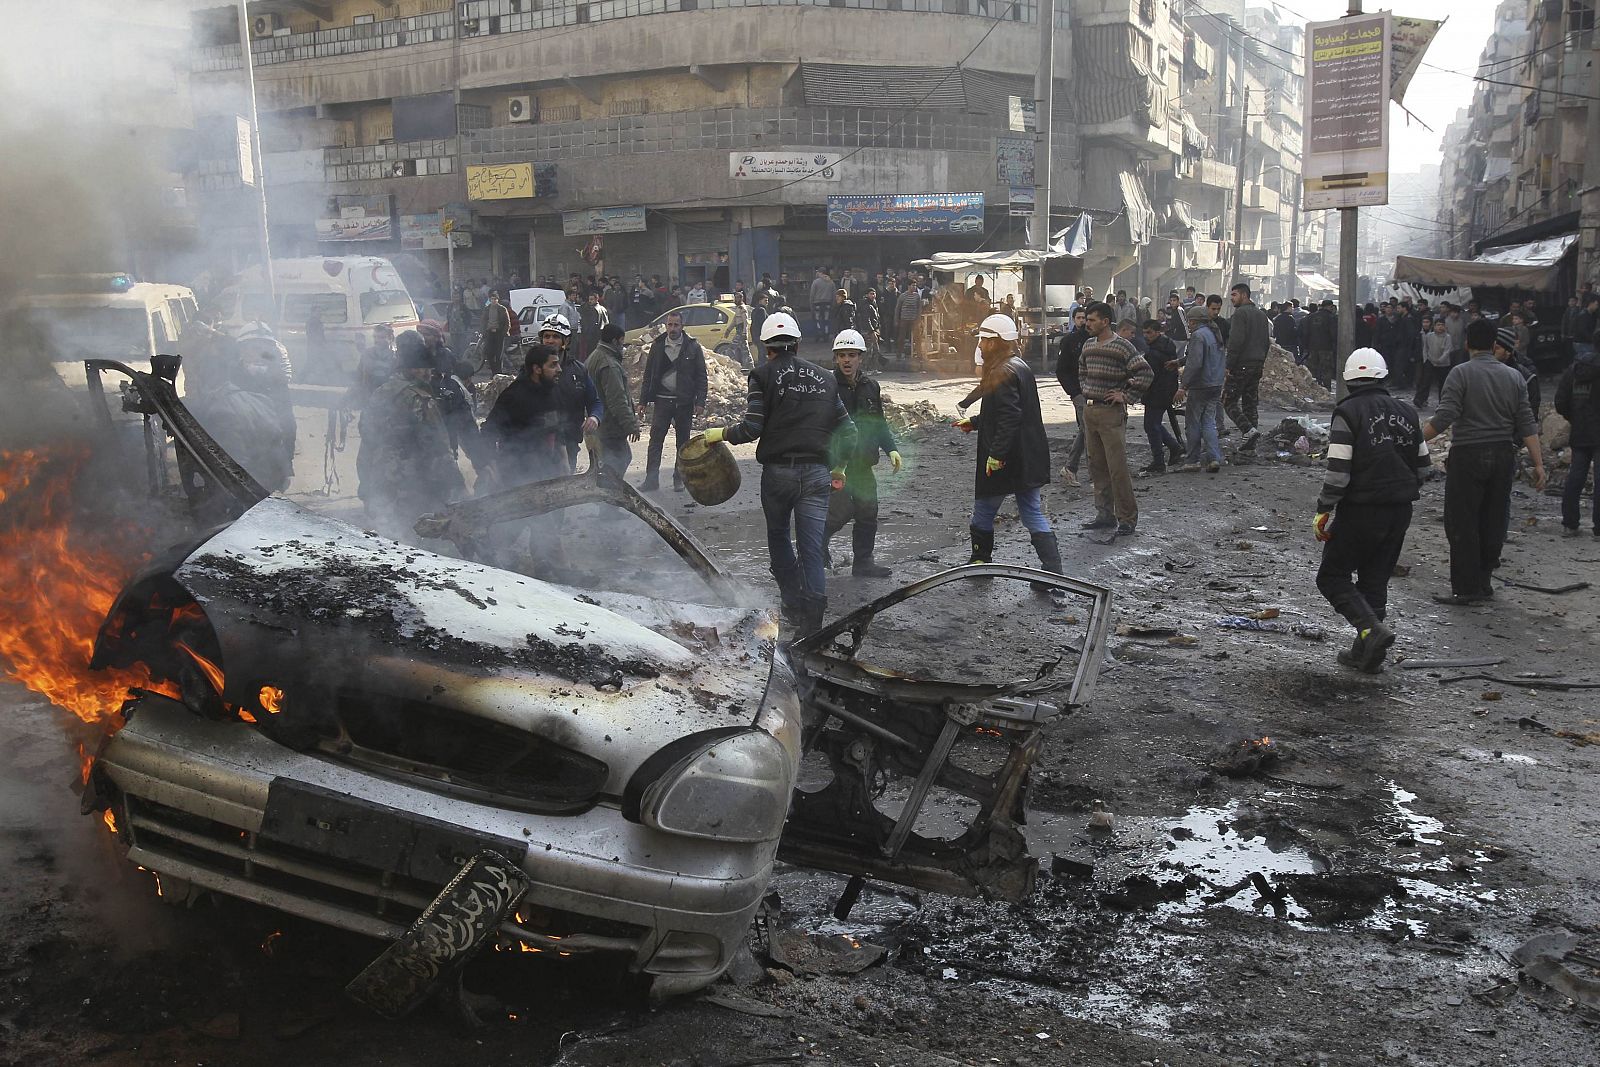 A car burns amid damage caused by what activists said was an air strike by forces loyal to Syria's President Assad in Aleppo